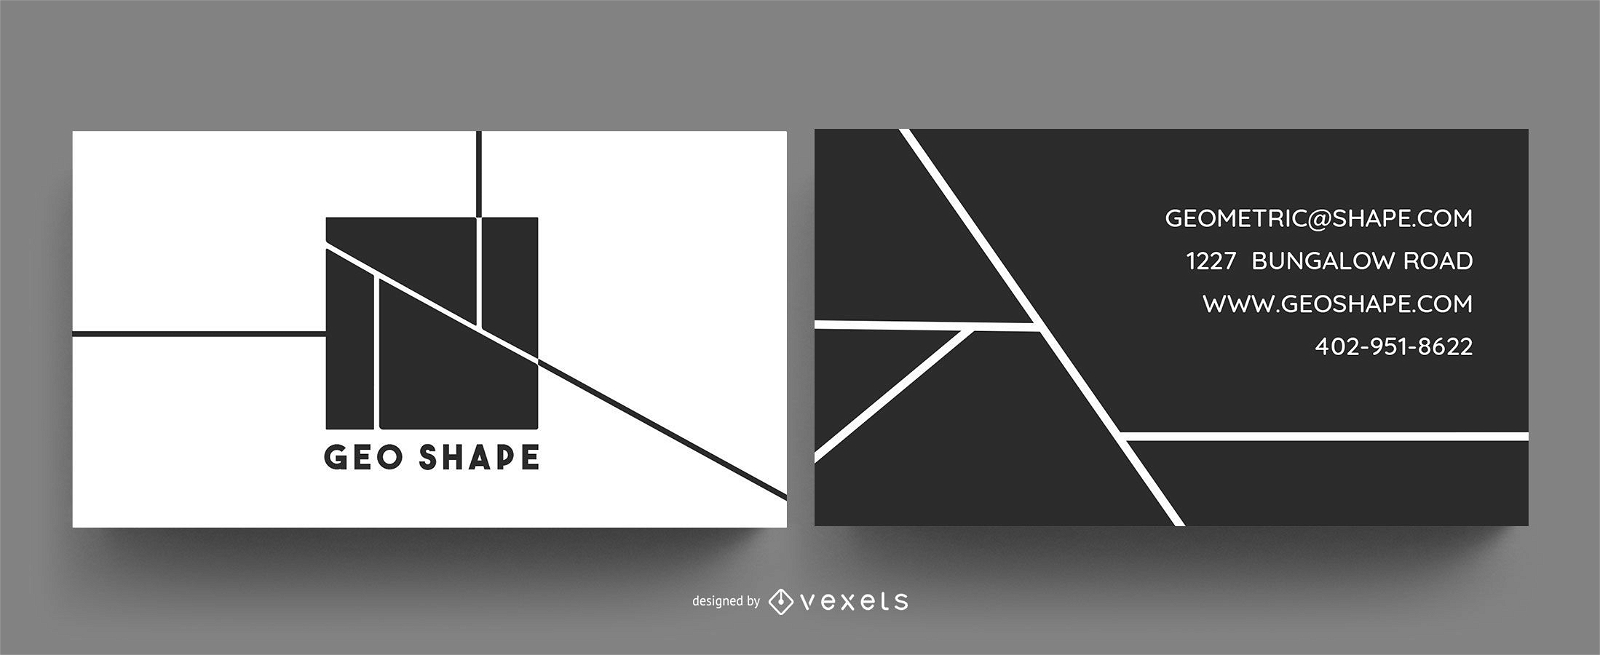 Geo shapes business card